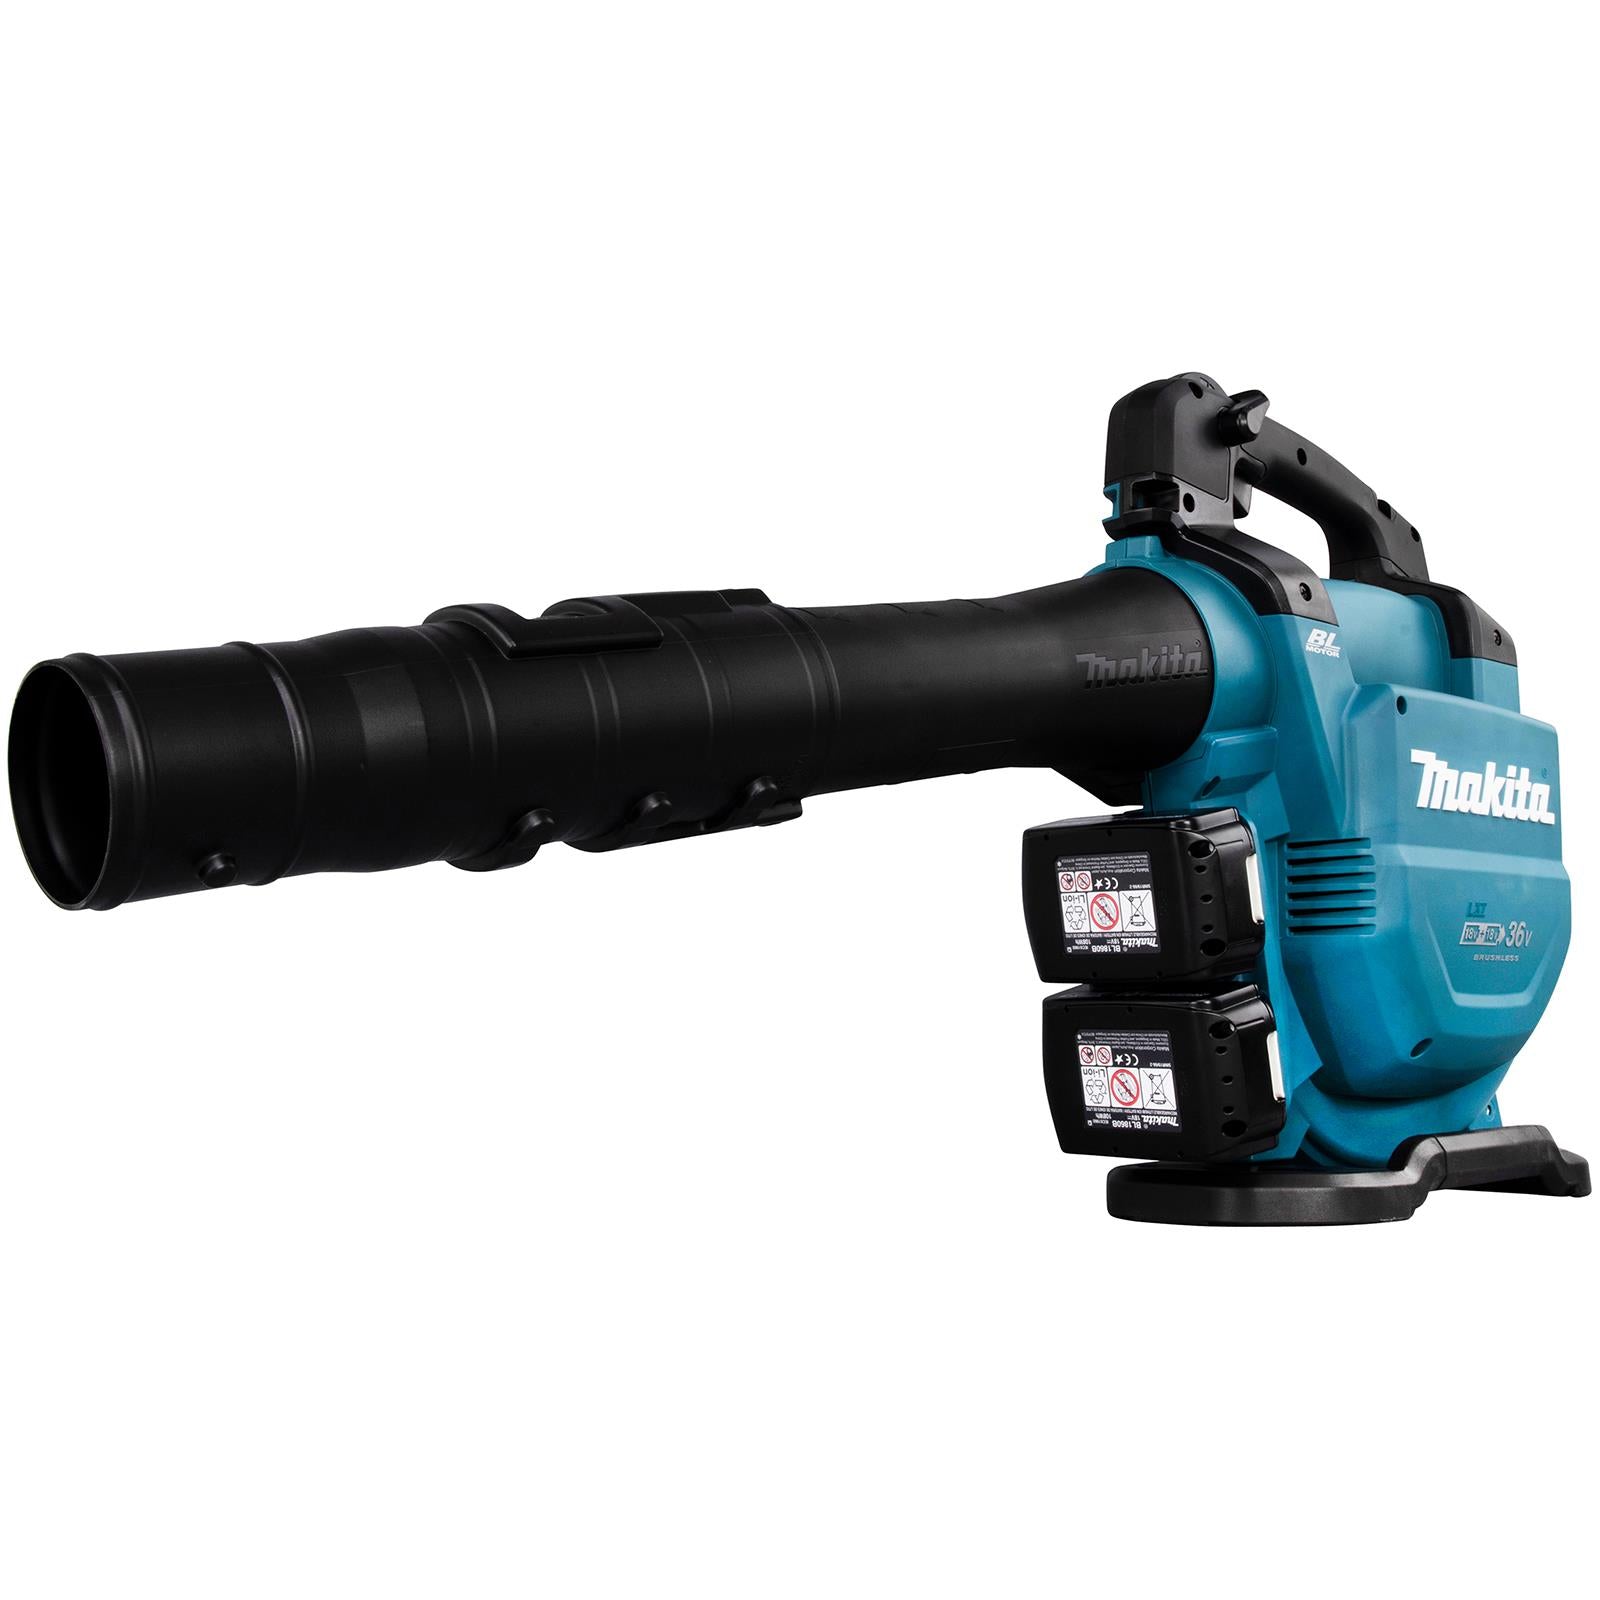 Makita Leaf Blower Vacuum Kit 18V x 2 LXT Brushless Cordless 2 x 6Ah Battery and Dual Rapid Charger 14.4N Garden Grass Clippings Construction DUB363PG2V